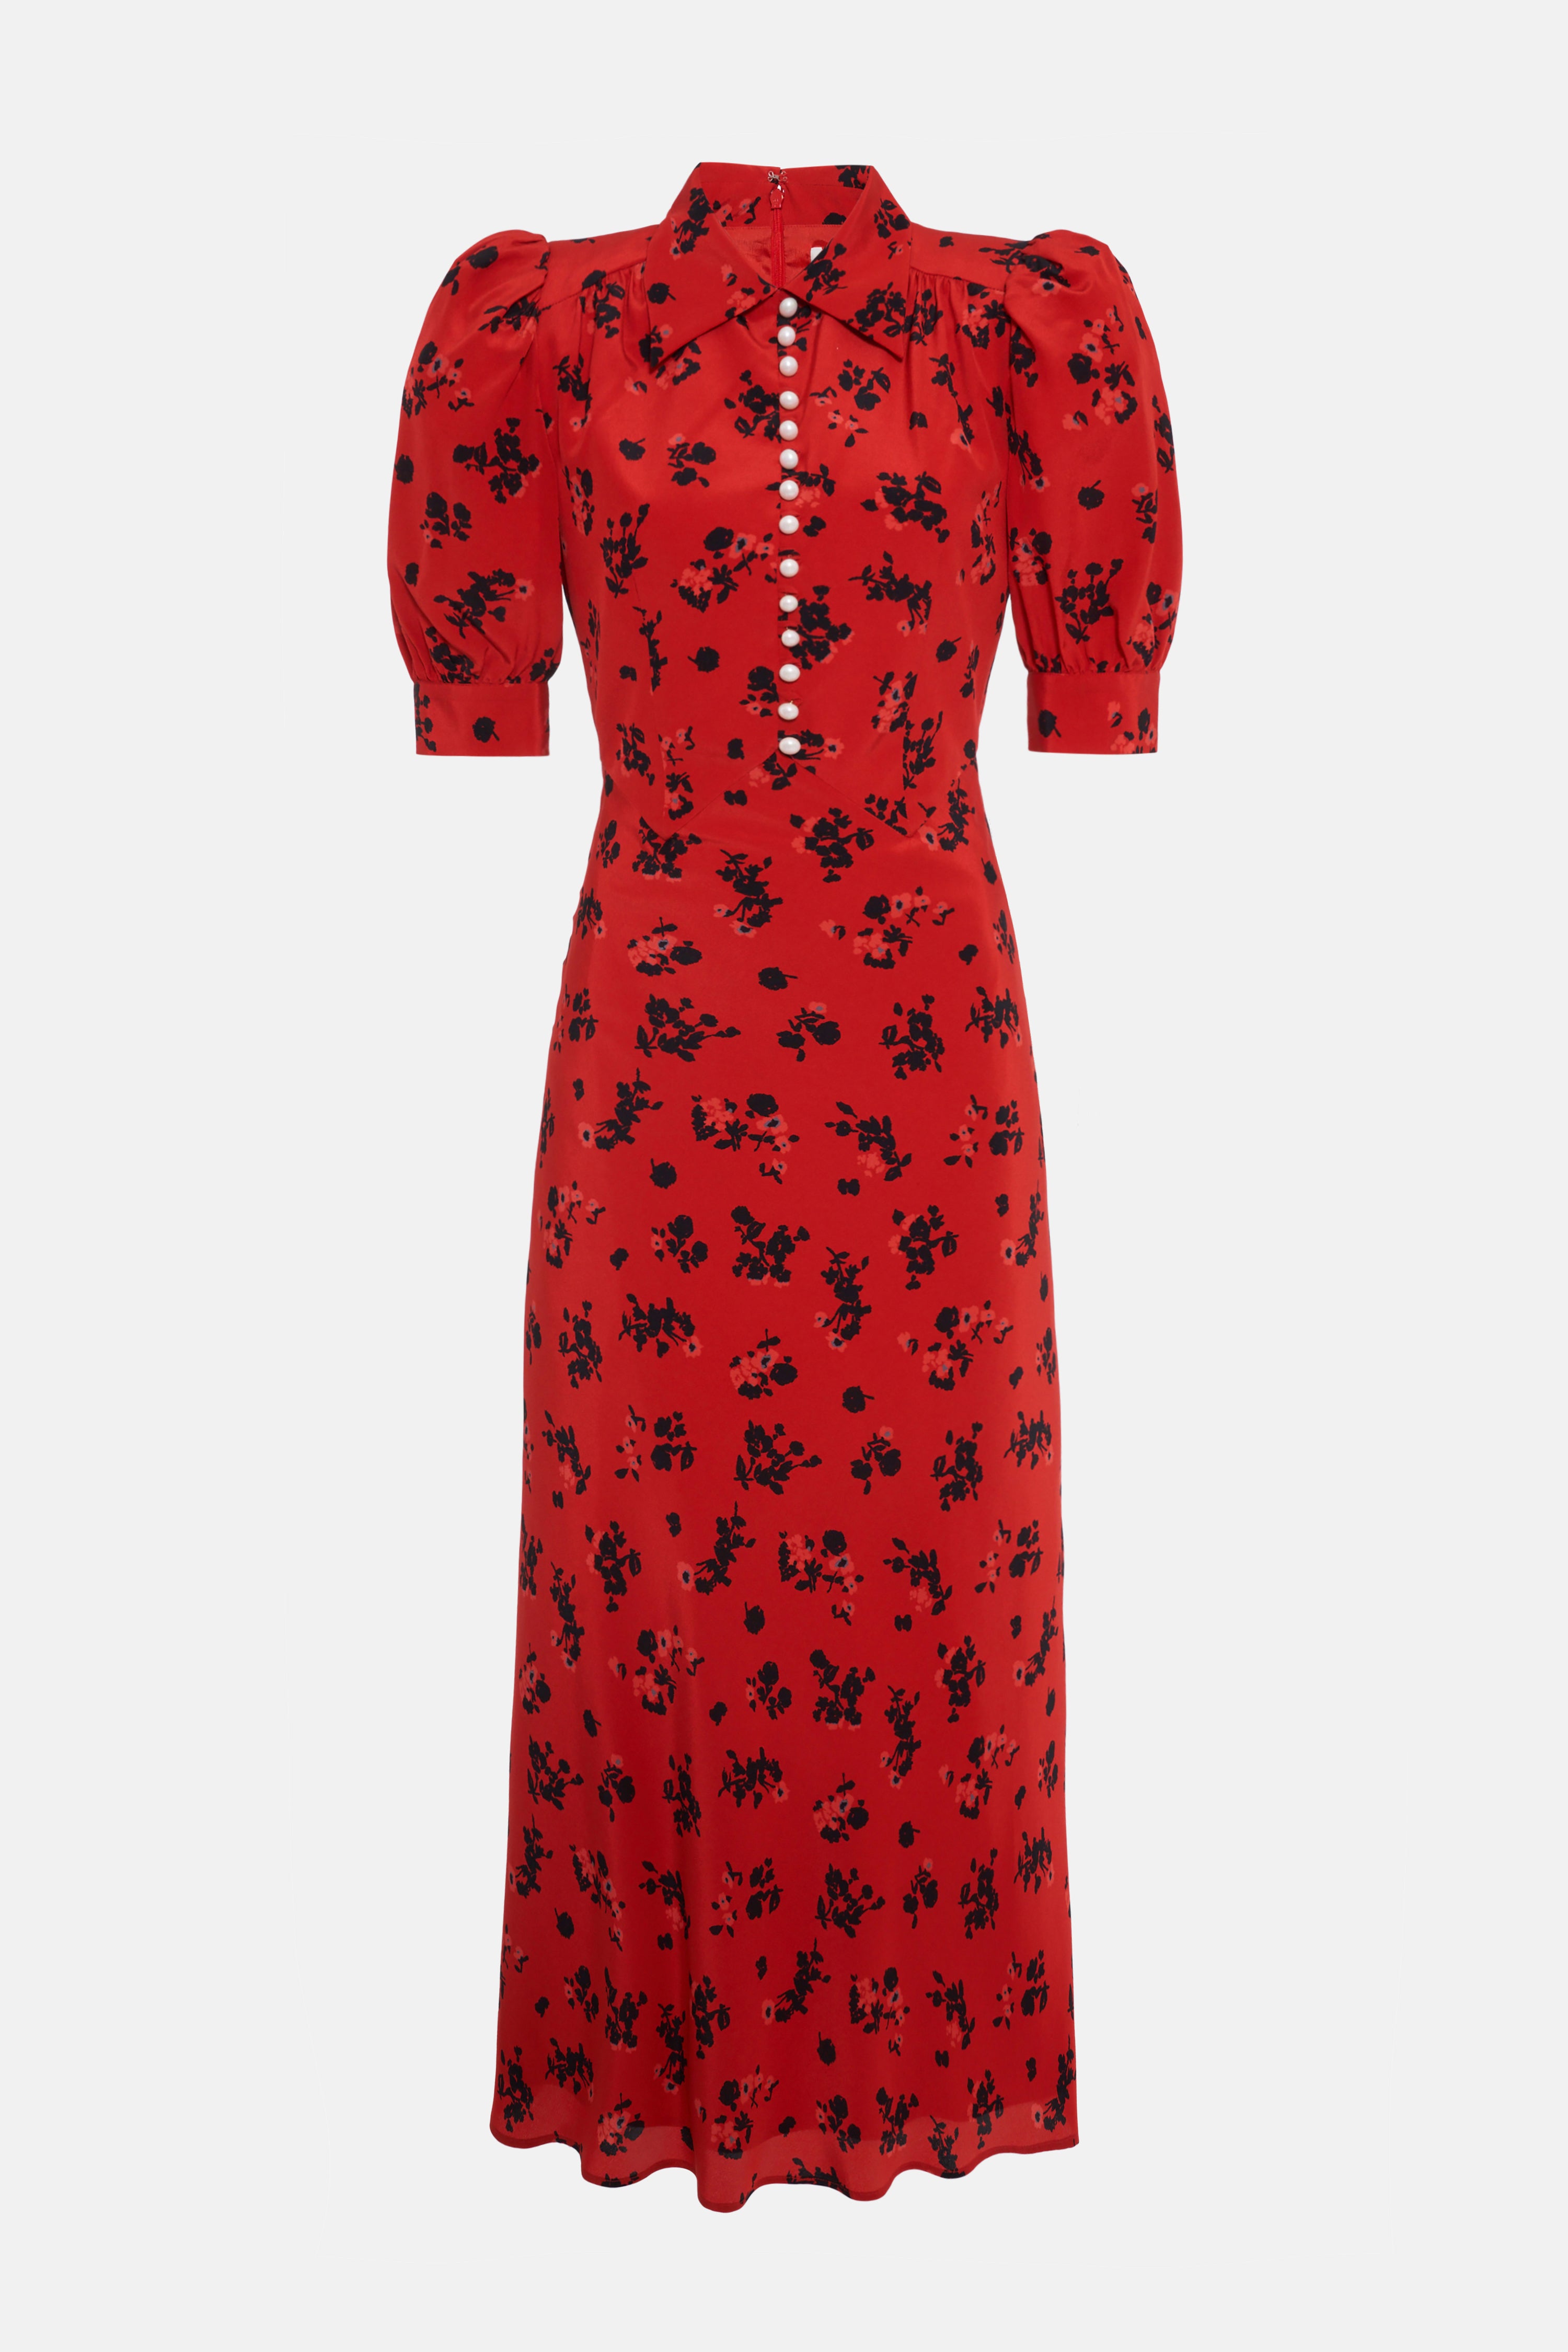 ROSE PRINT SILK DRESS WITH COLLAR AND BUTTONS